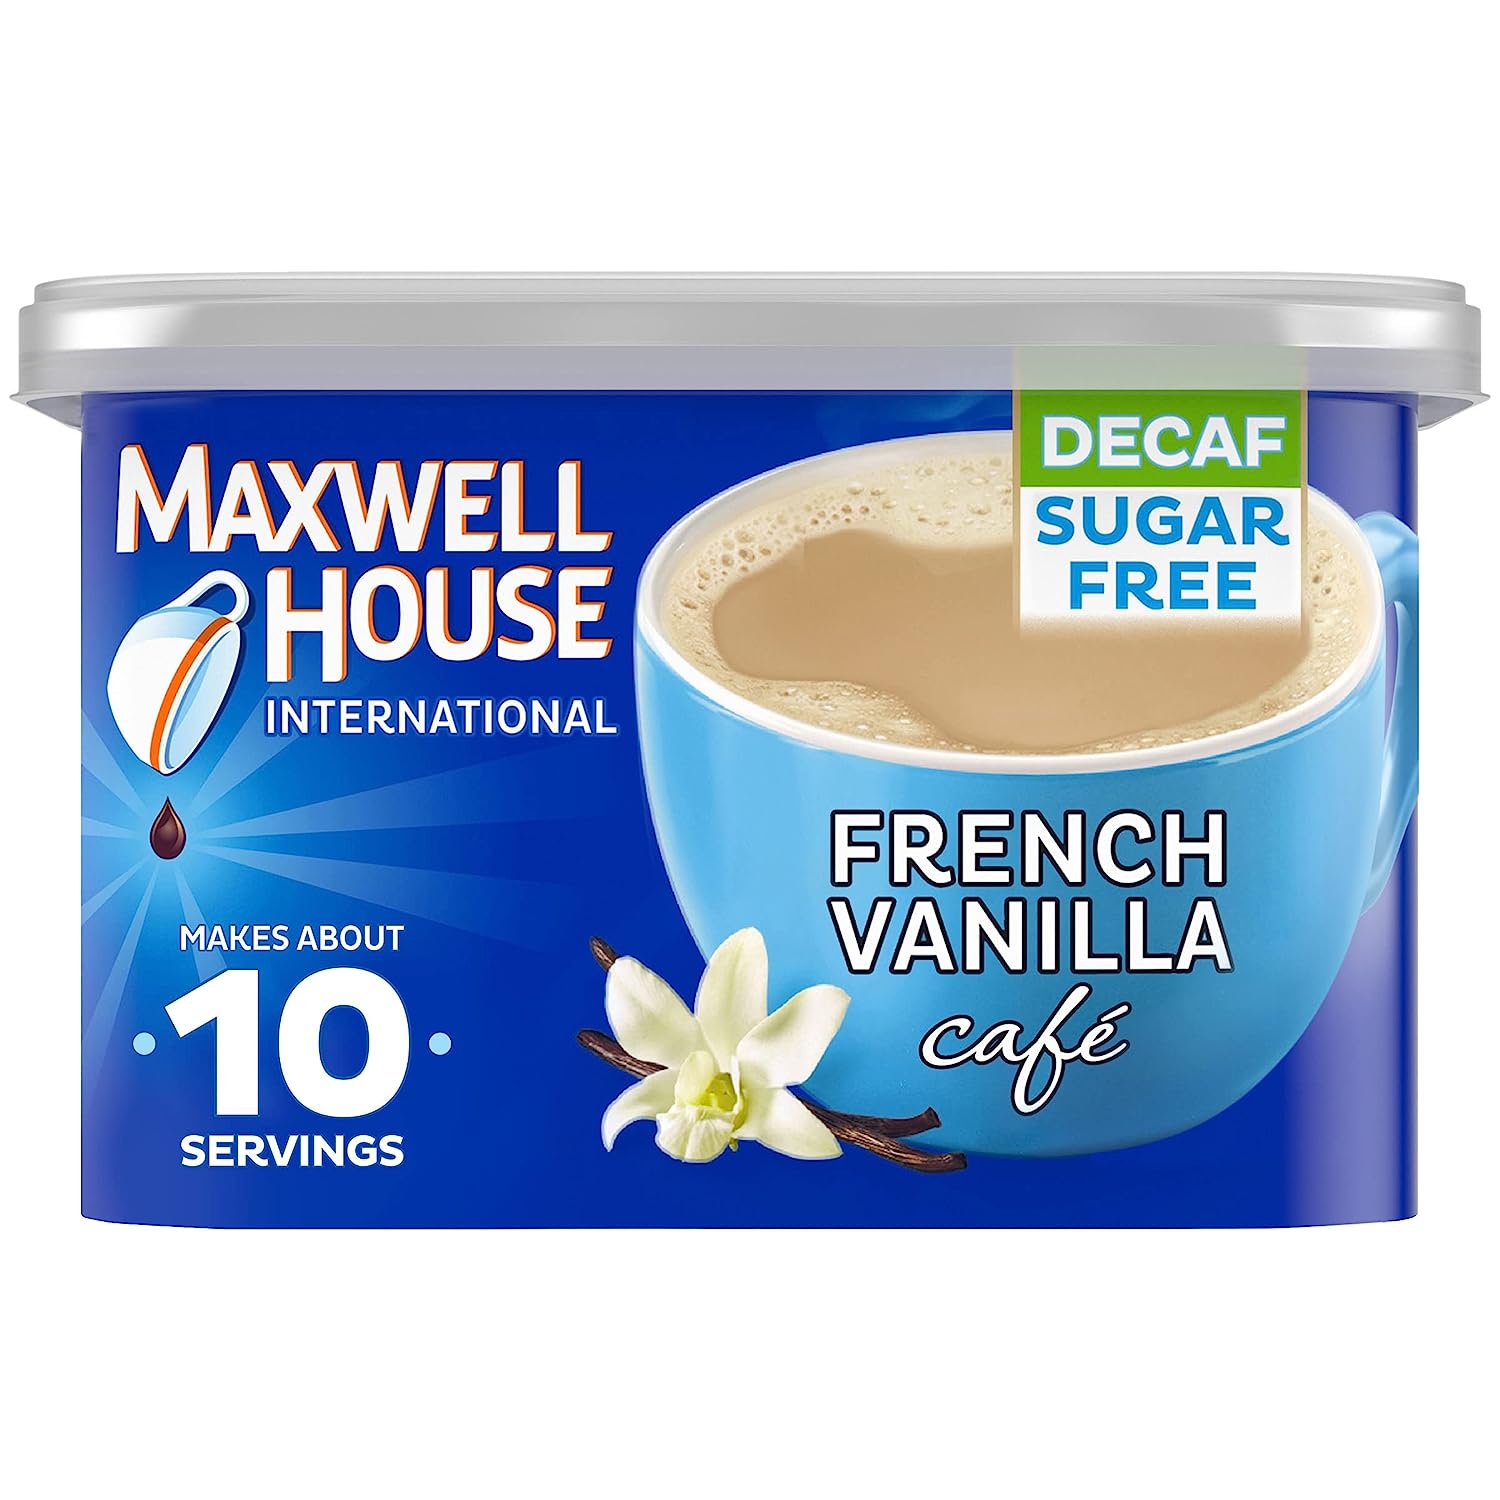 Maxwell House International French Vanilla Café-Style Decaf Sugar Free light_roast Beverage Mix, Canister